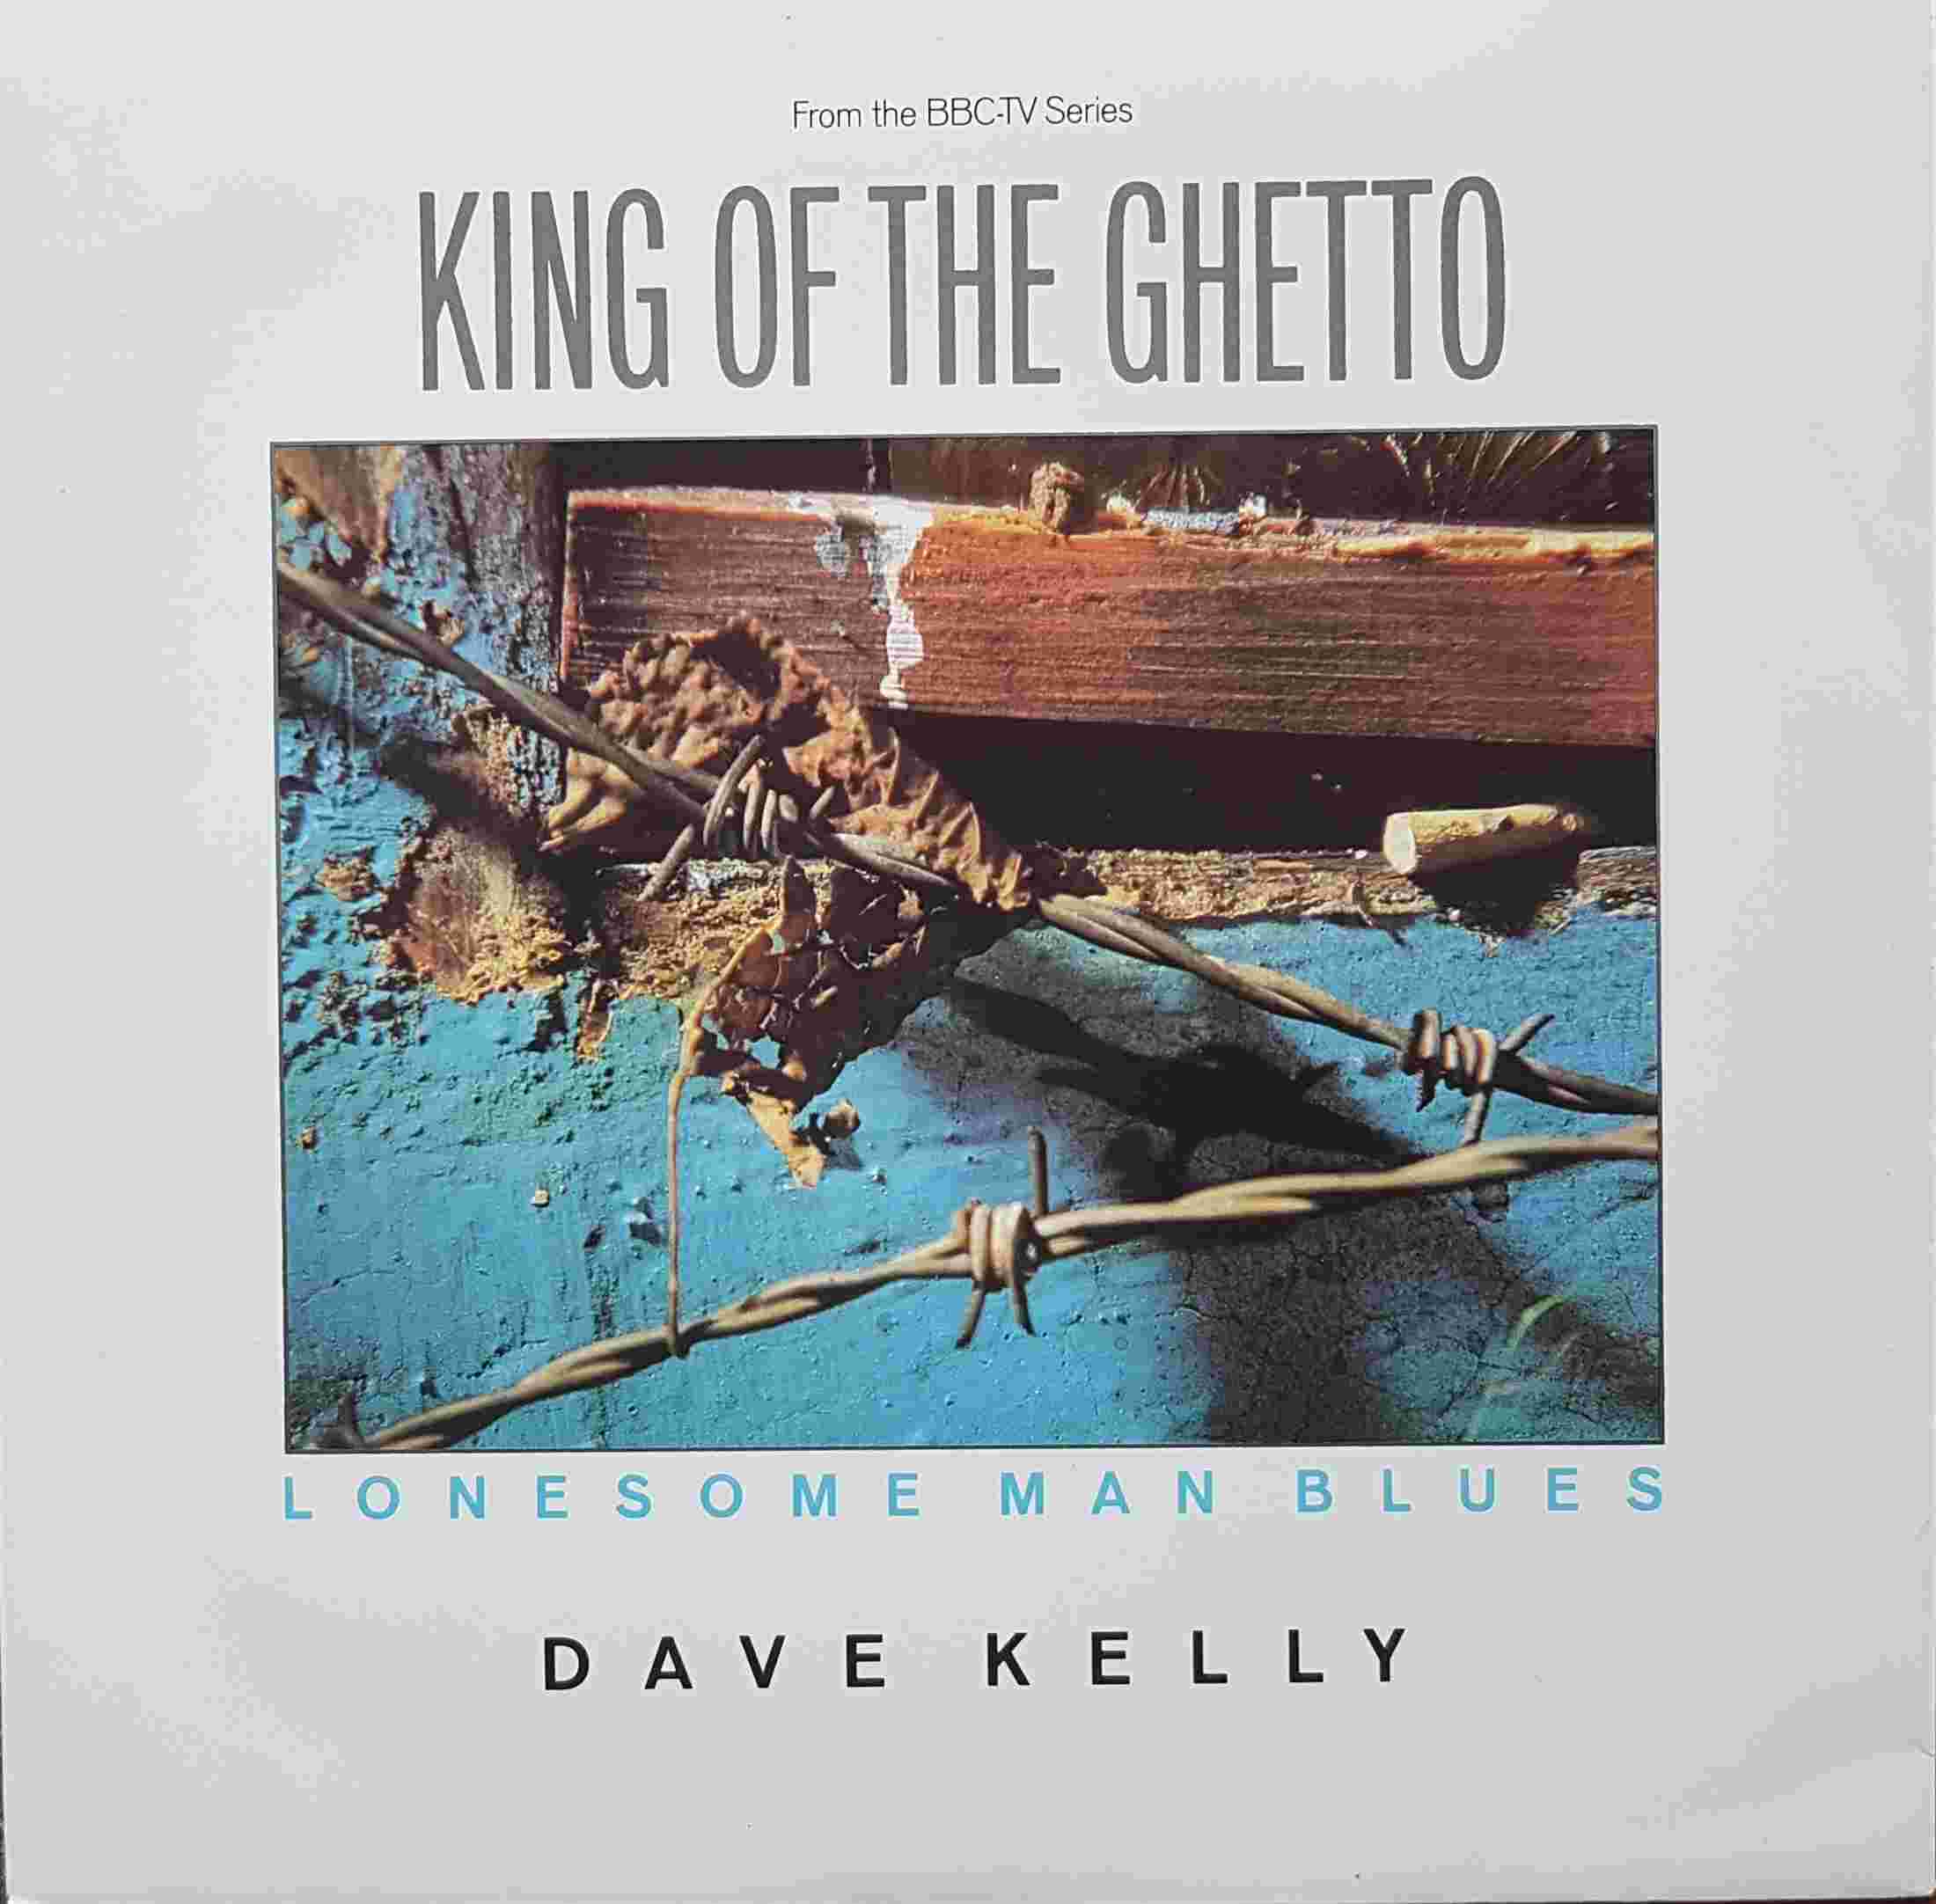 Picture of Lonesome man blues (King of the ghetto) by artist David Kelly / Peter Filleul from the BBC 12inches - Records and Tapes library